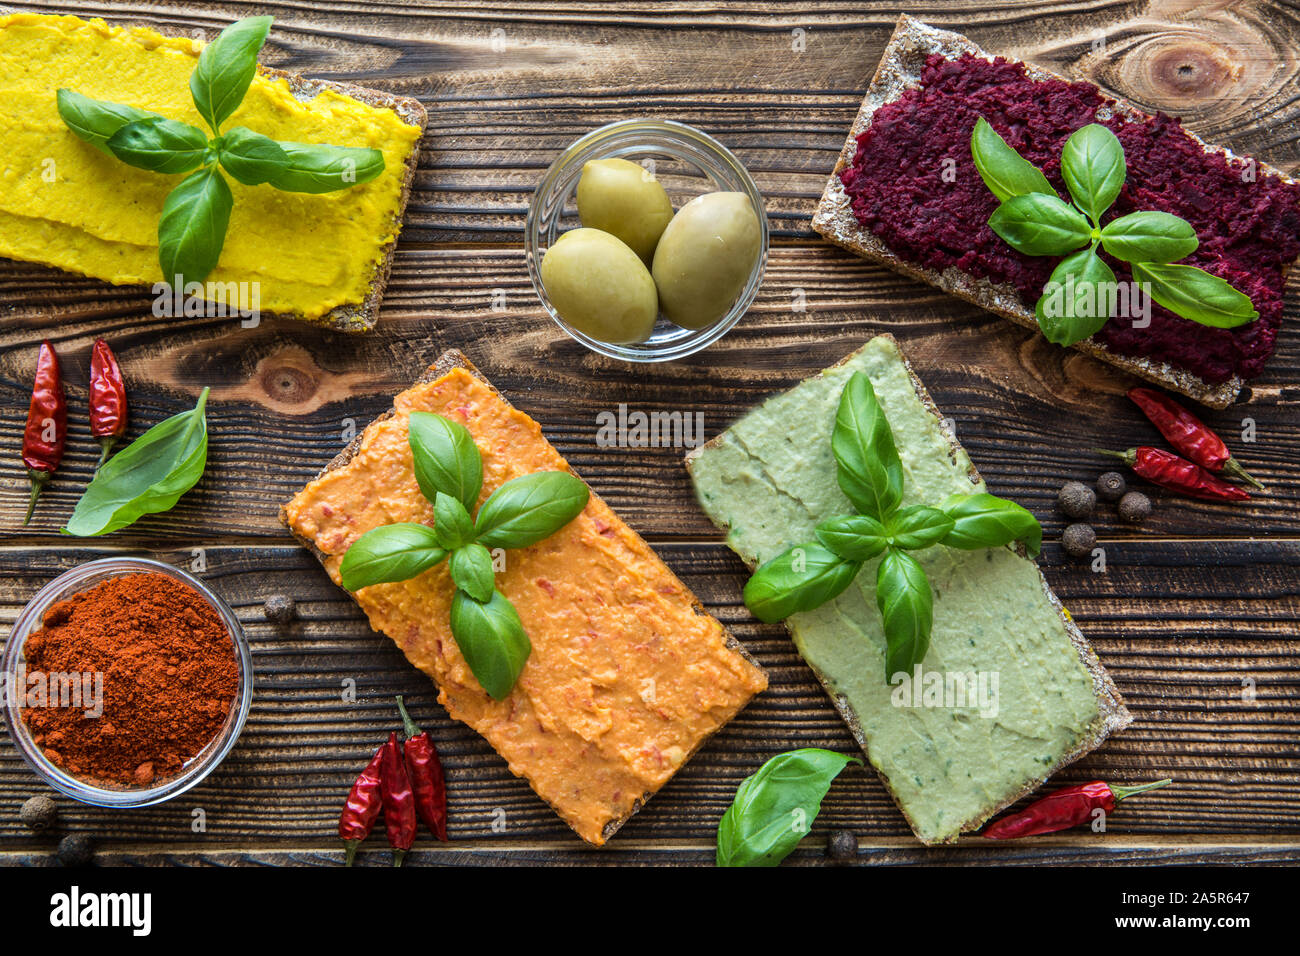 Different kinds of hummus on brown table. Sweet paprika, curry spice taste, beetroot with frsh asil eaves and avocado. Stock Photo